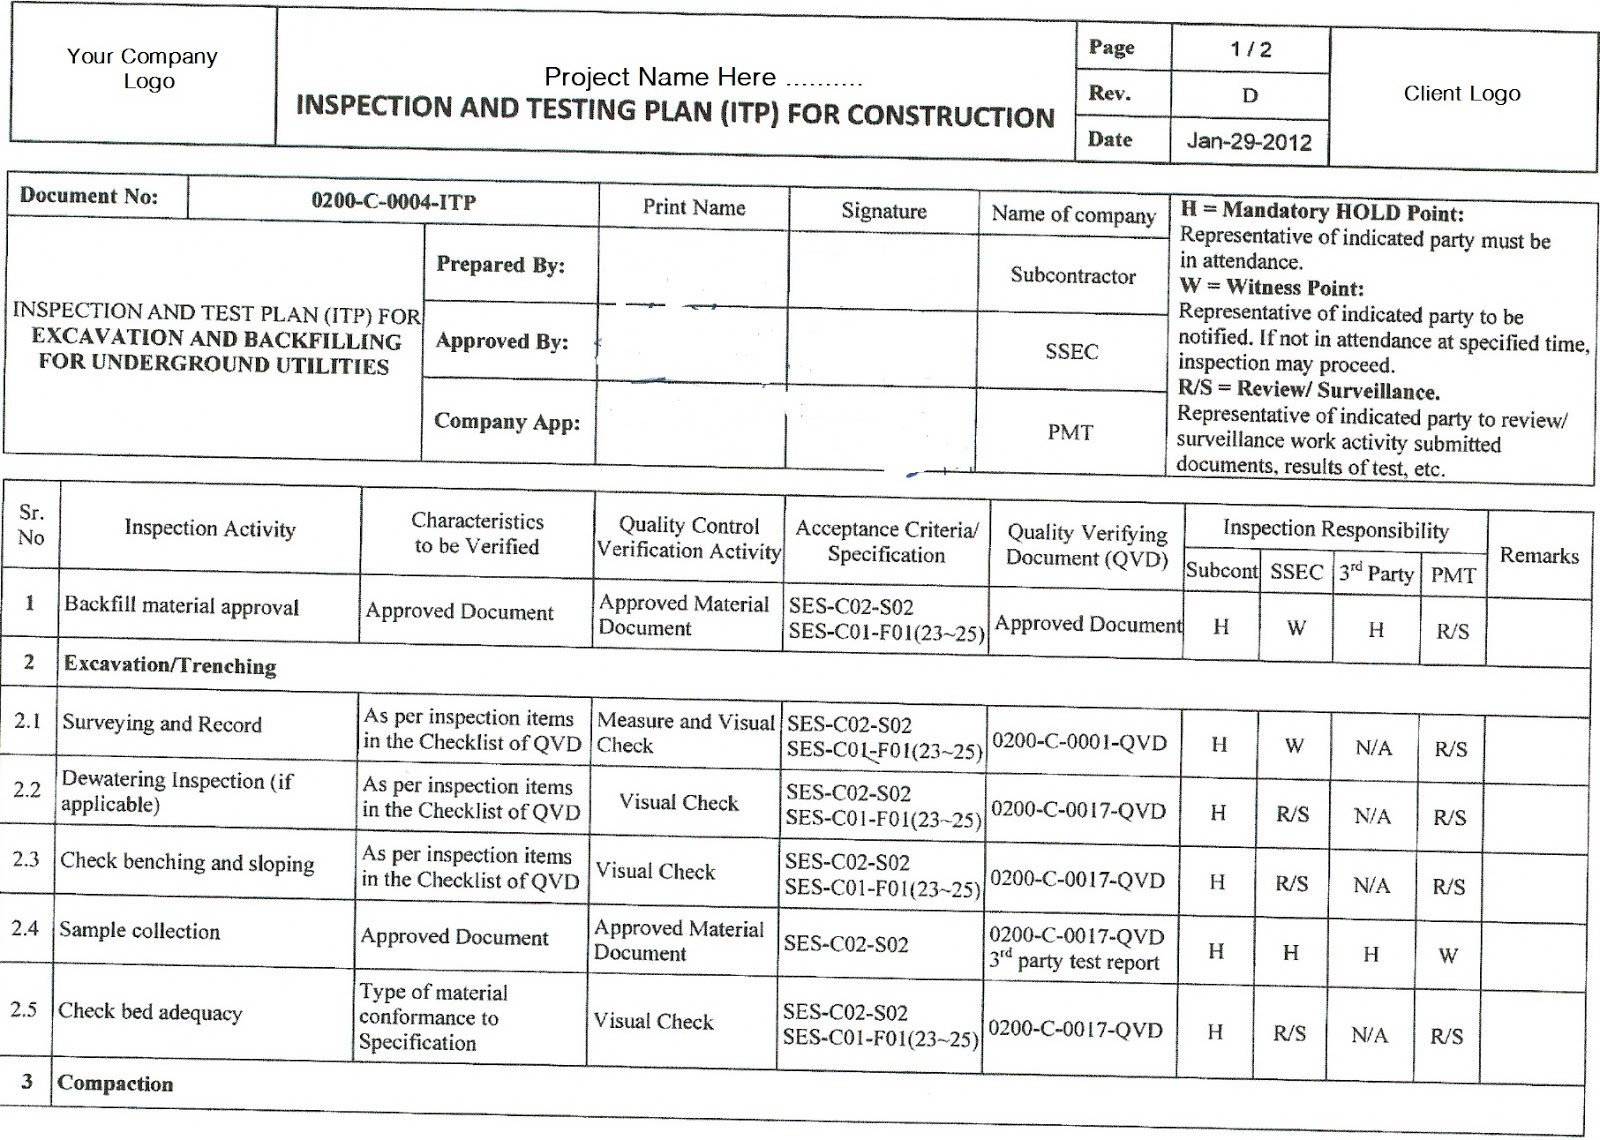 material assignment to inspection plan table